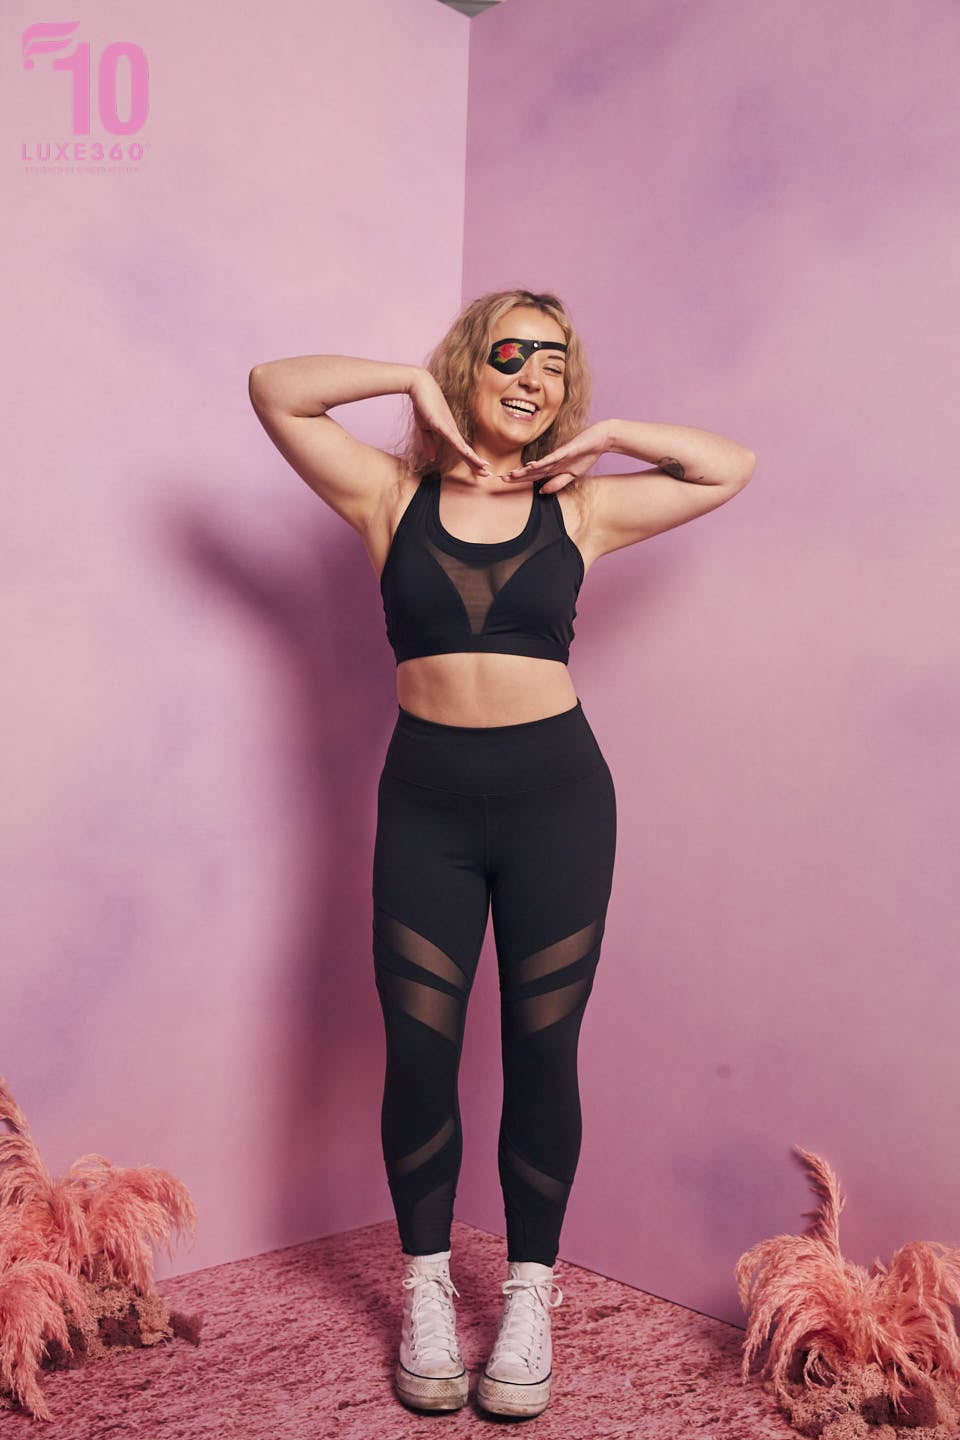 How to Achieve That Fit Girl Aesthetic for Less with Fabletics